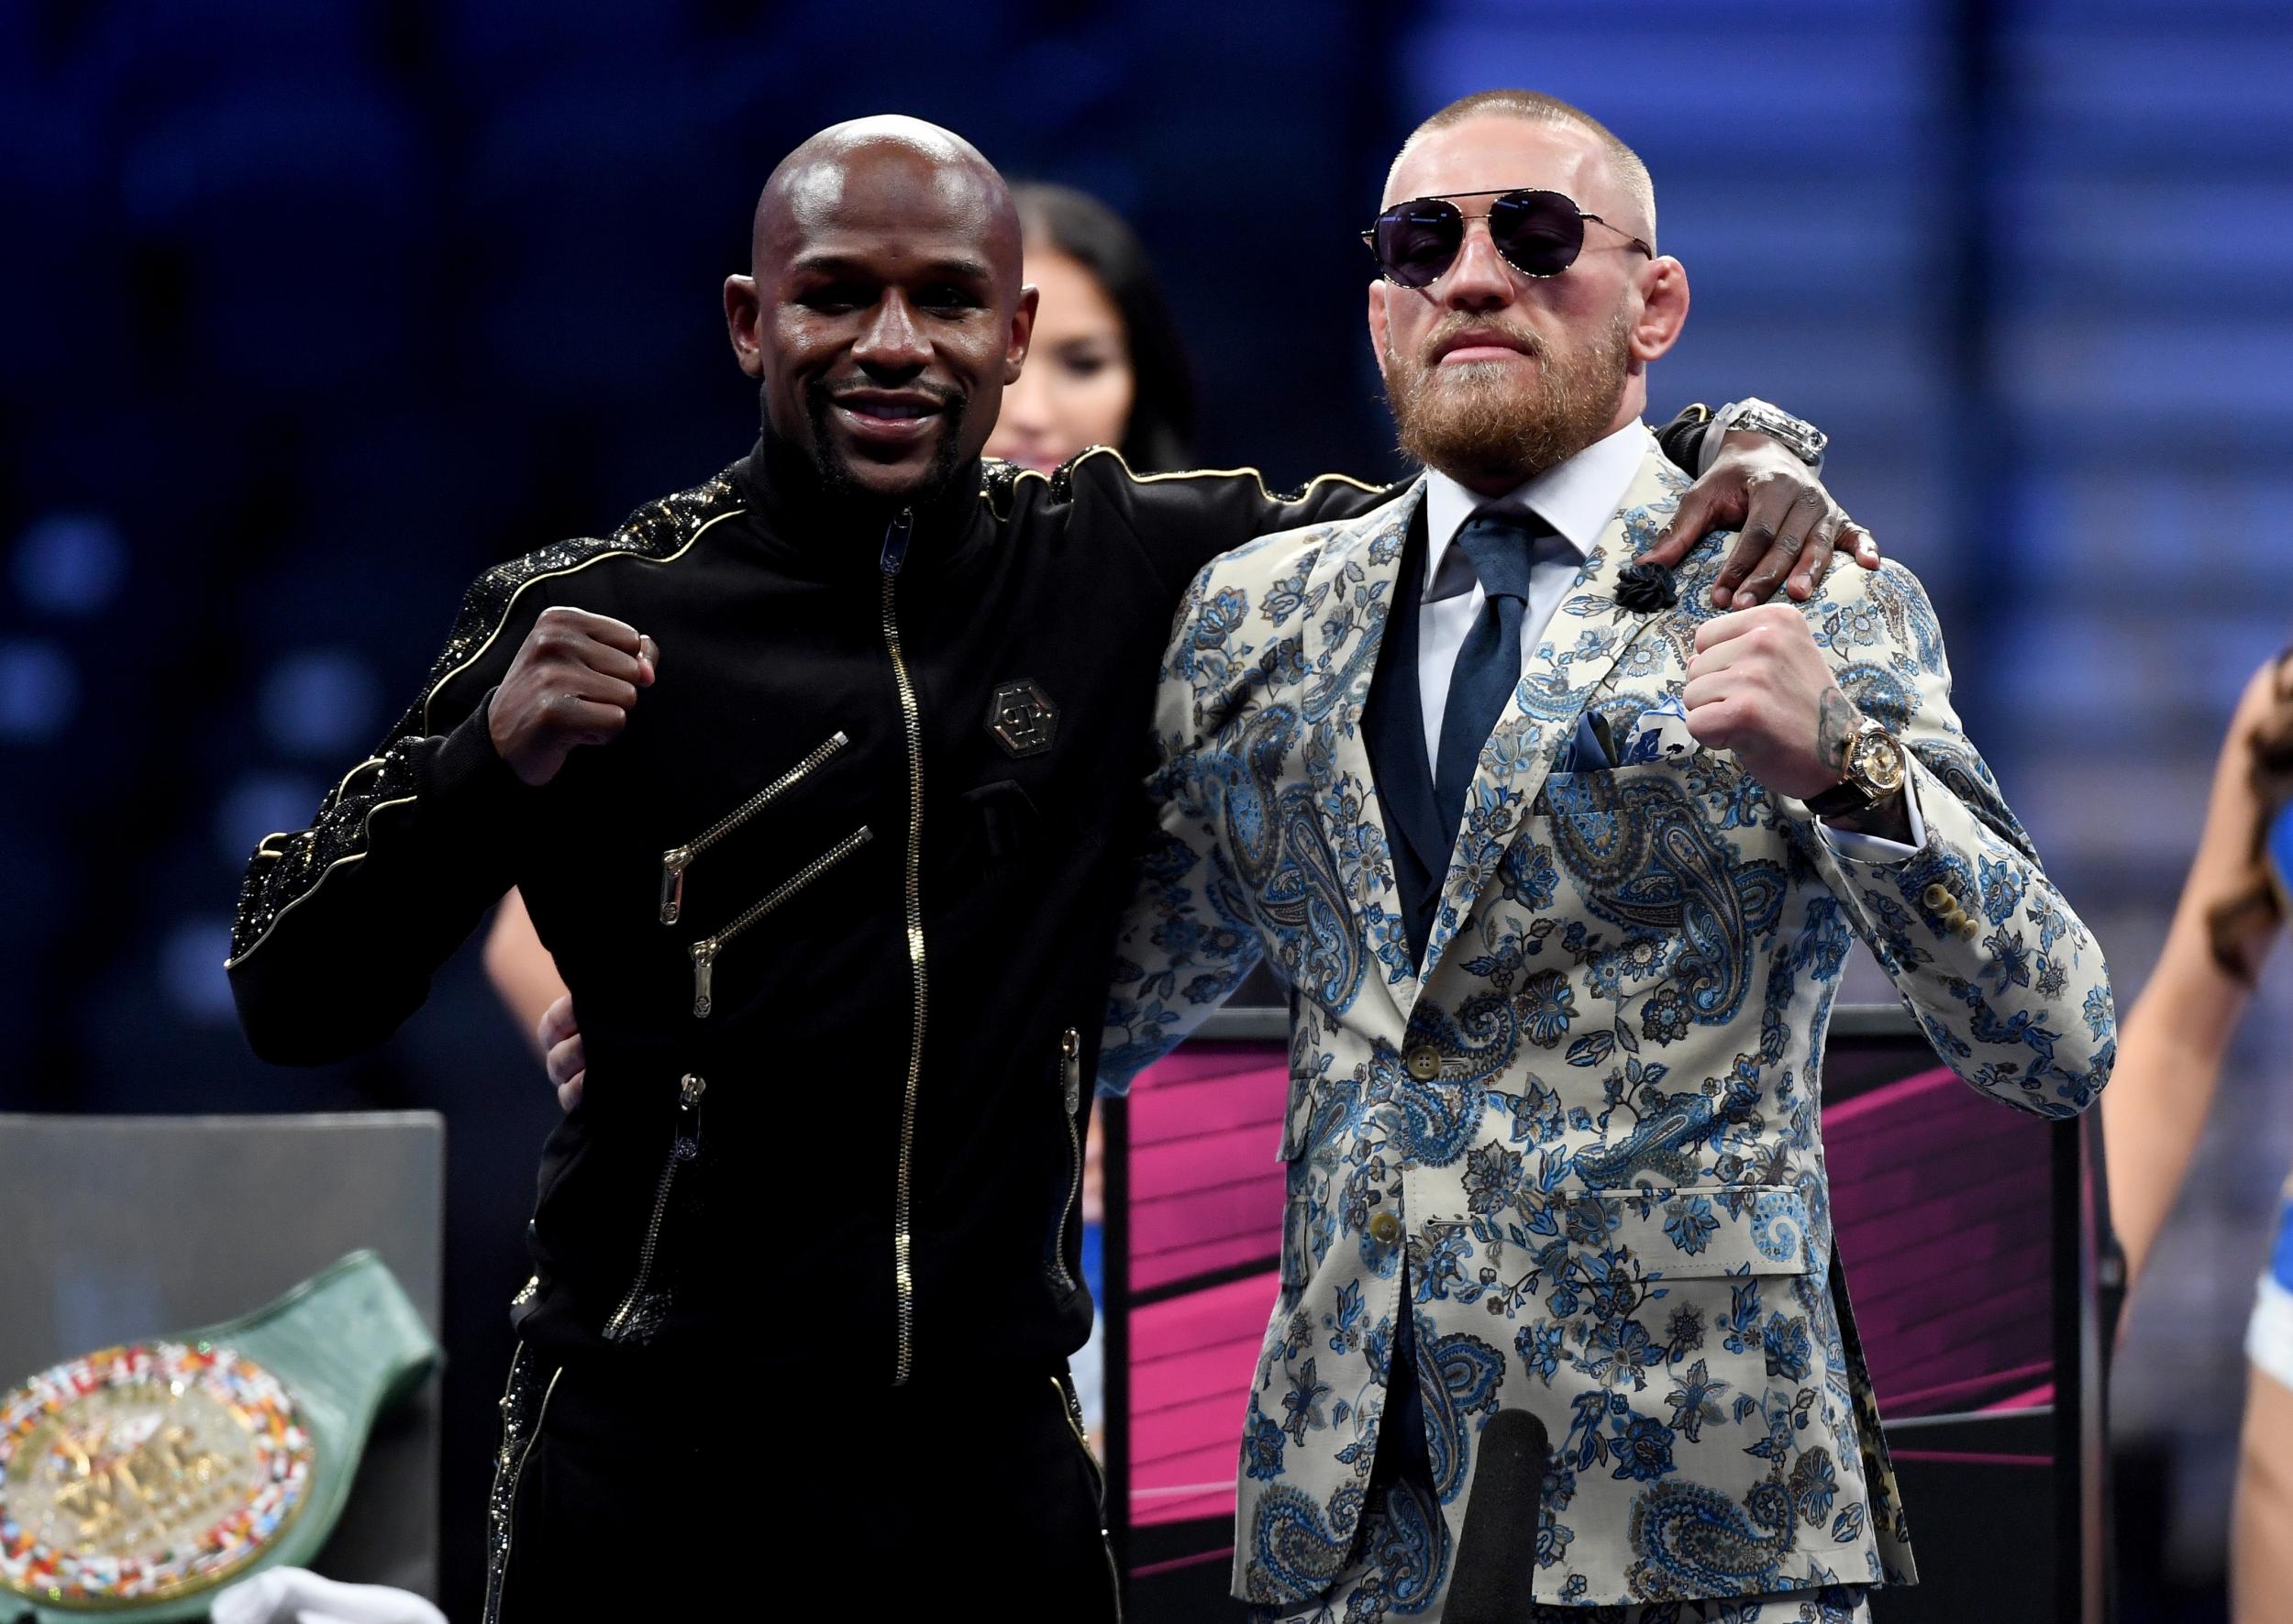 McGregor was full of praise for Mayweather